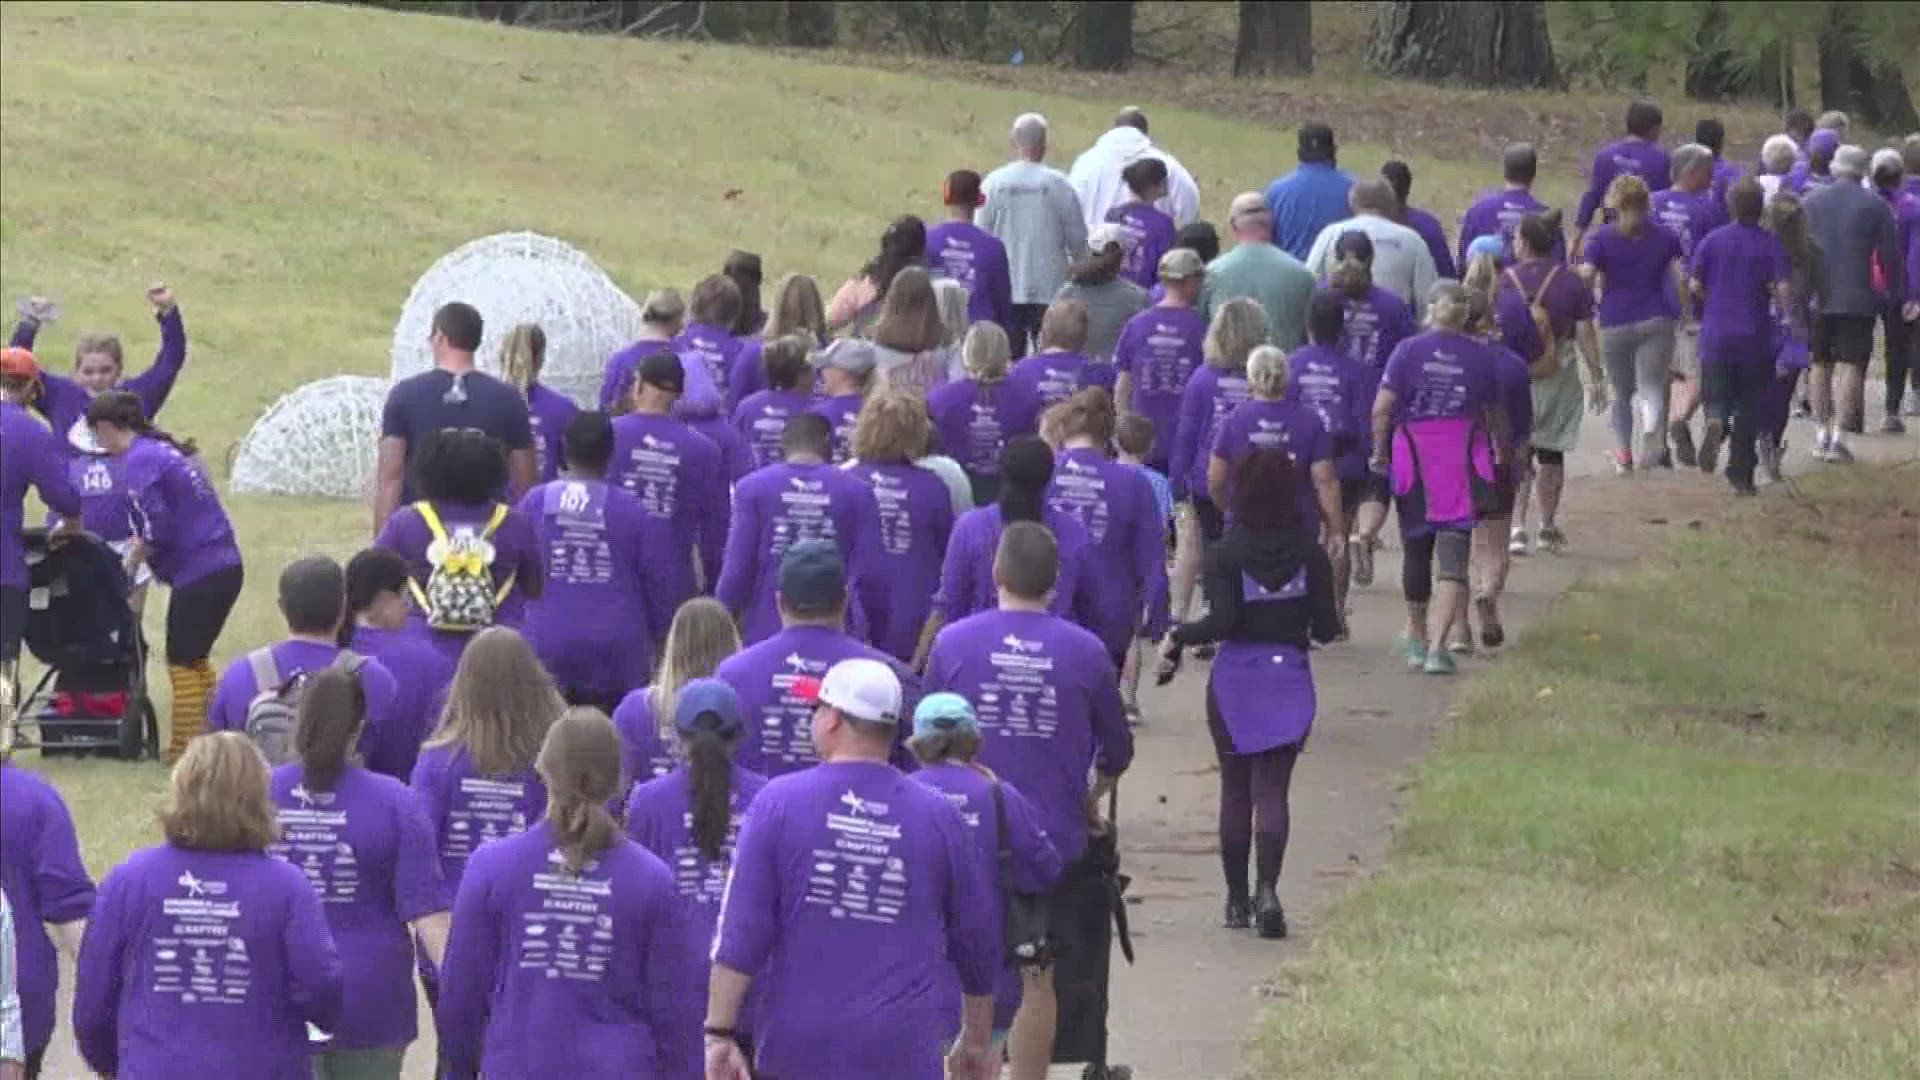 A ceremony honoring pancreatic cancer survivors took place at Shelby Farms Park along with music, food trucks and proceeds donated to research.